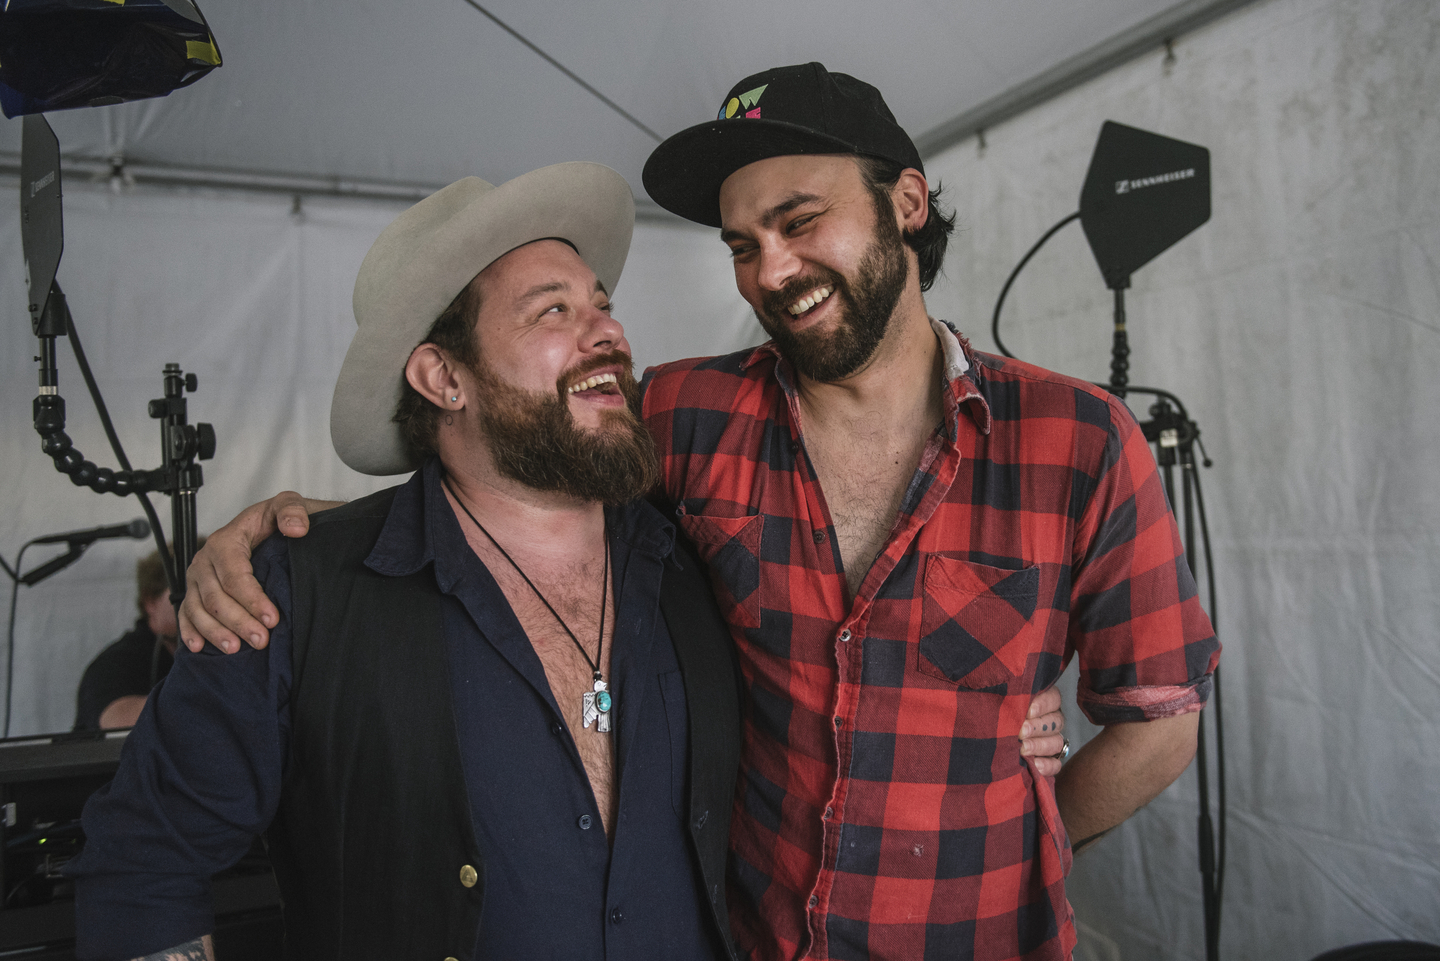 Nathaniel Rateliff and Shakey Graves, 2018. Photo by Merrick Ales